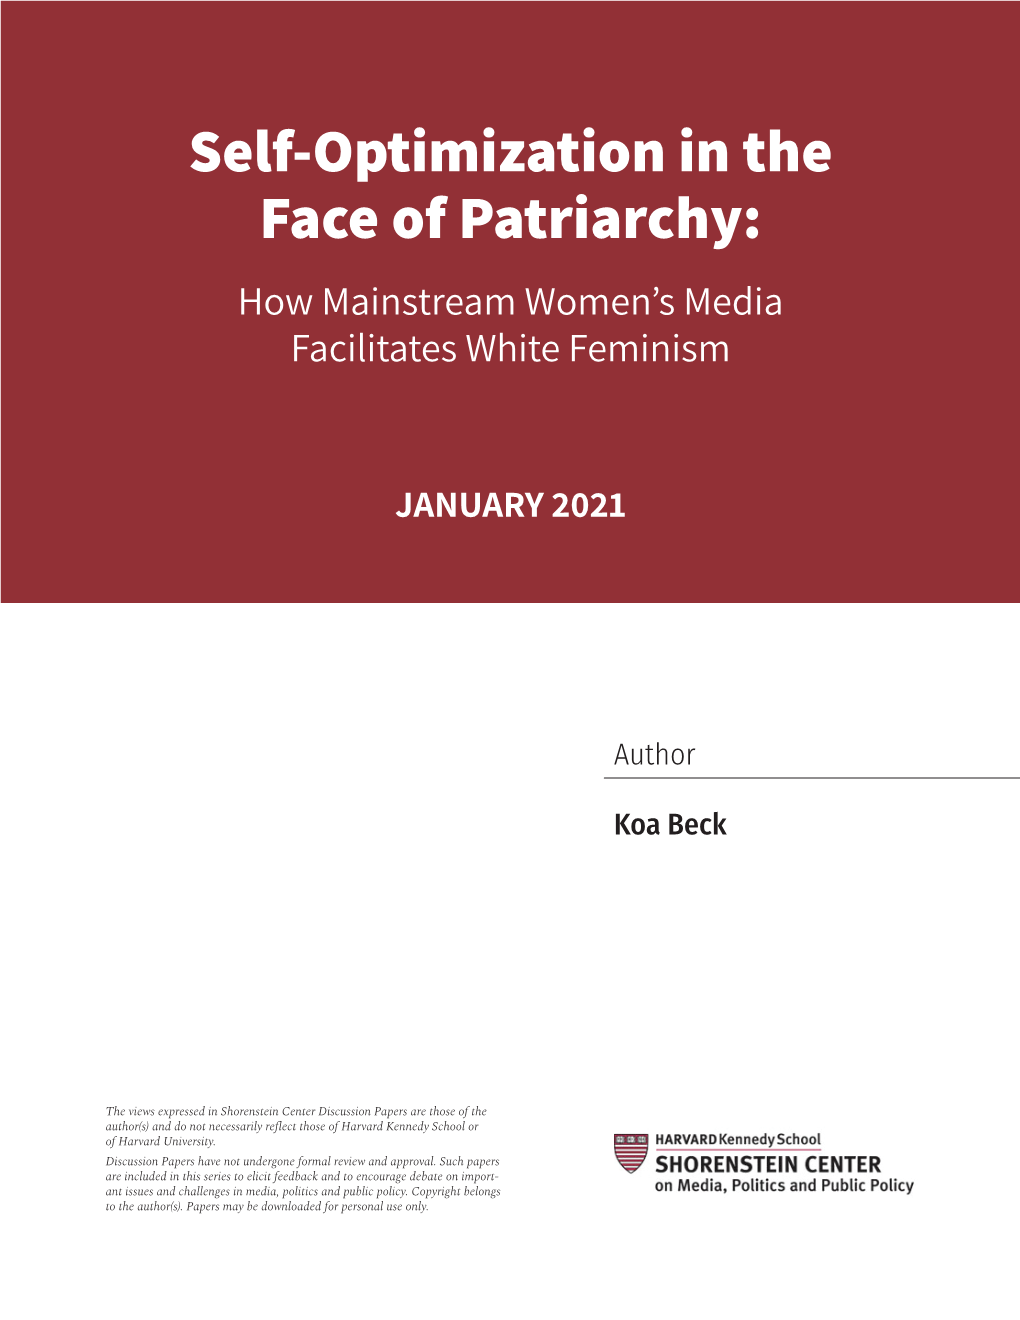 Self-Optimization in the Face of Patriarchy: How Mainstream Women’S Media Facilitates White Feminism